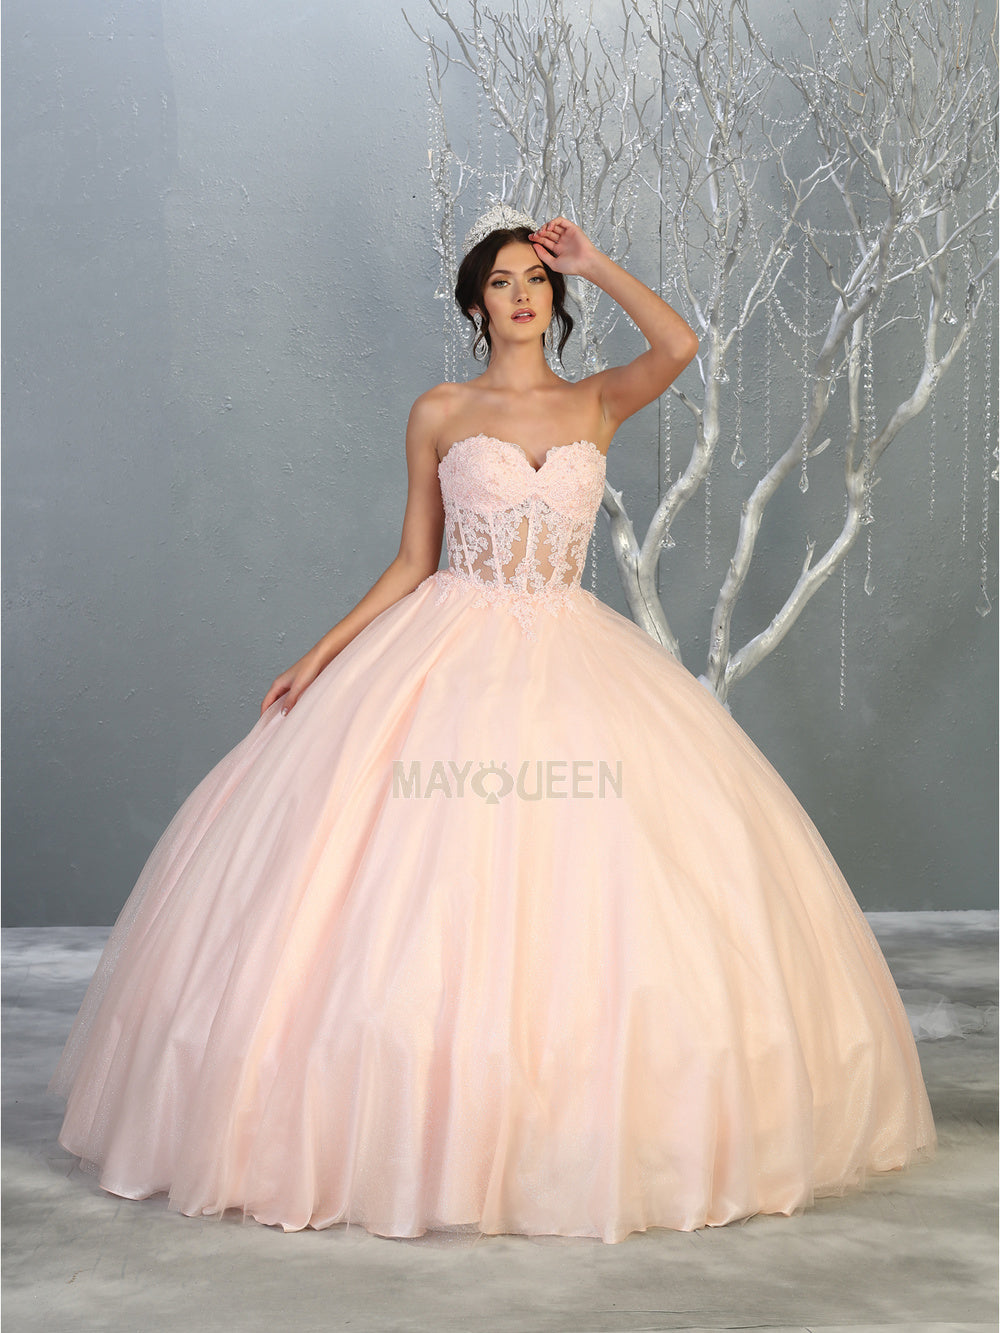 MQ LK141 - Strapless A-Line Quinceanera Ball Gown with Sheer Lace